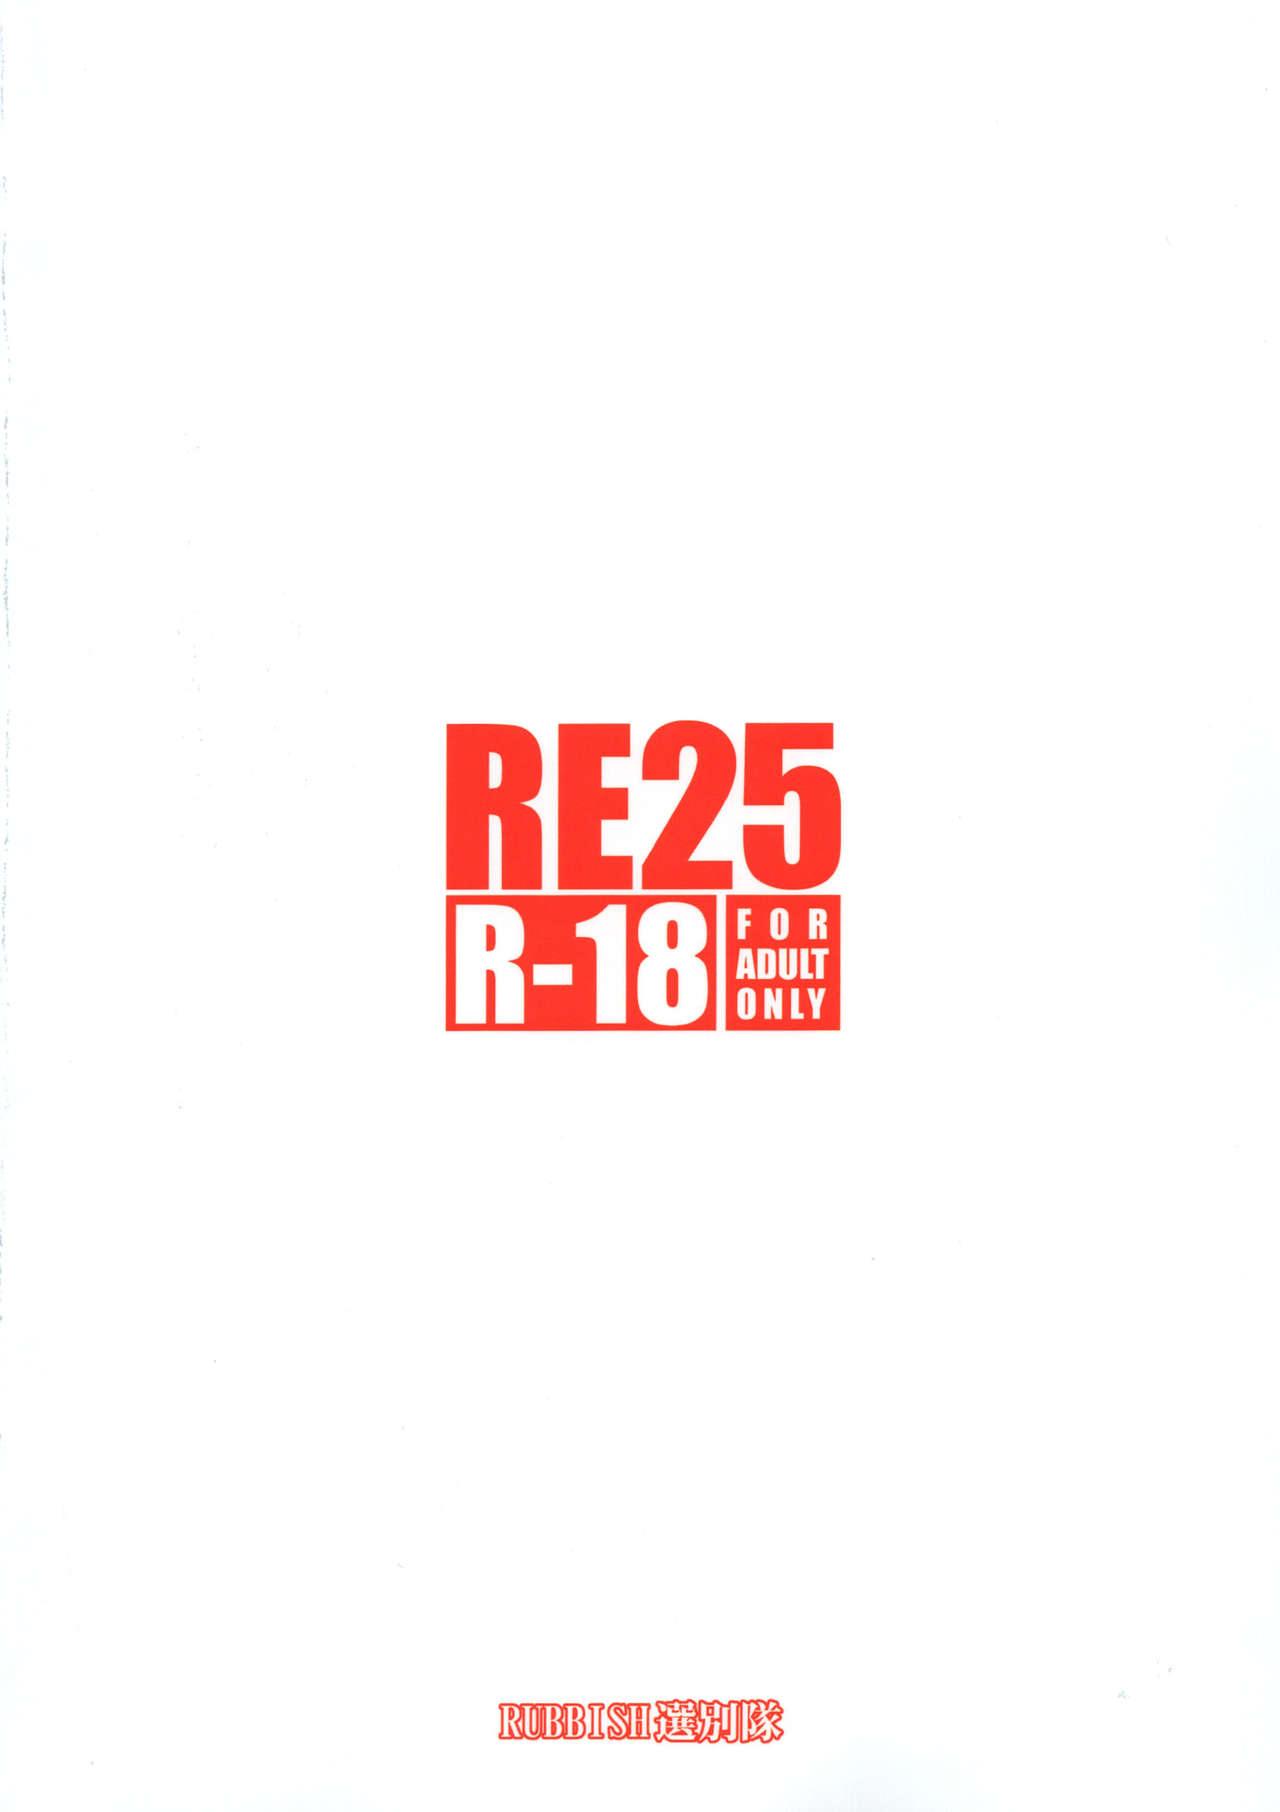 RE25 31